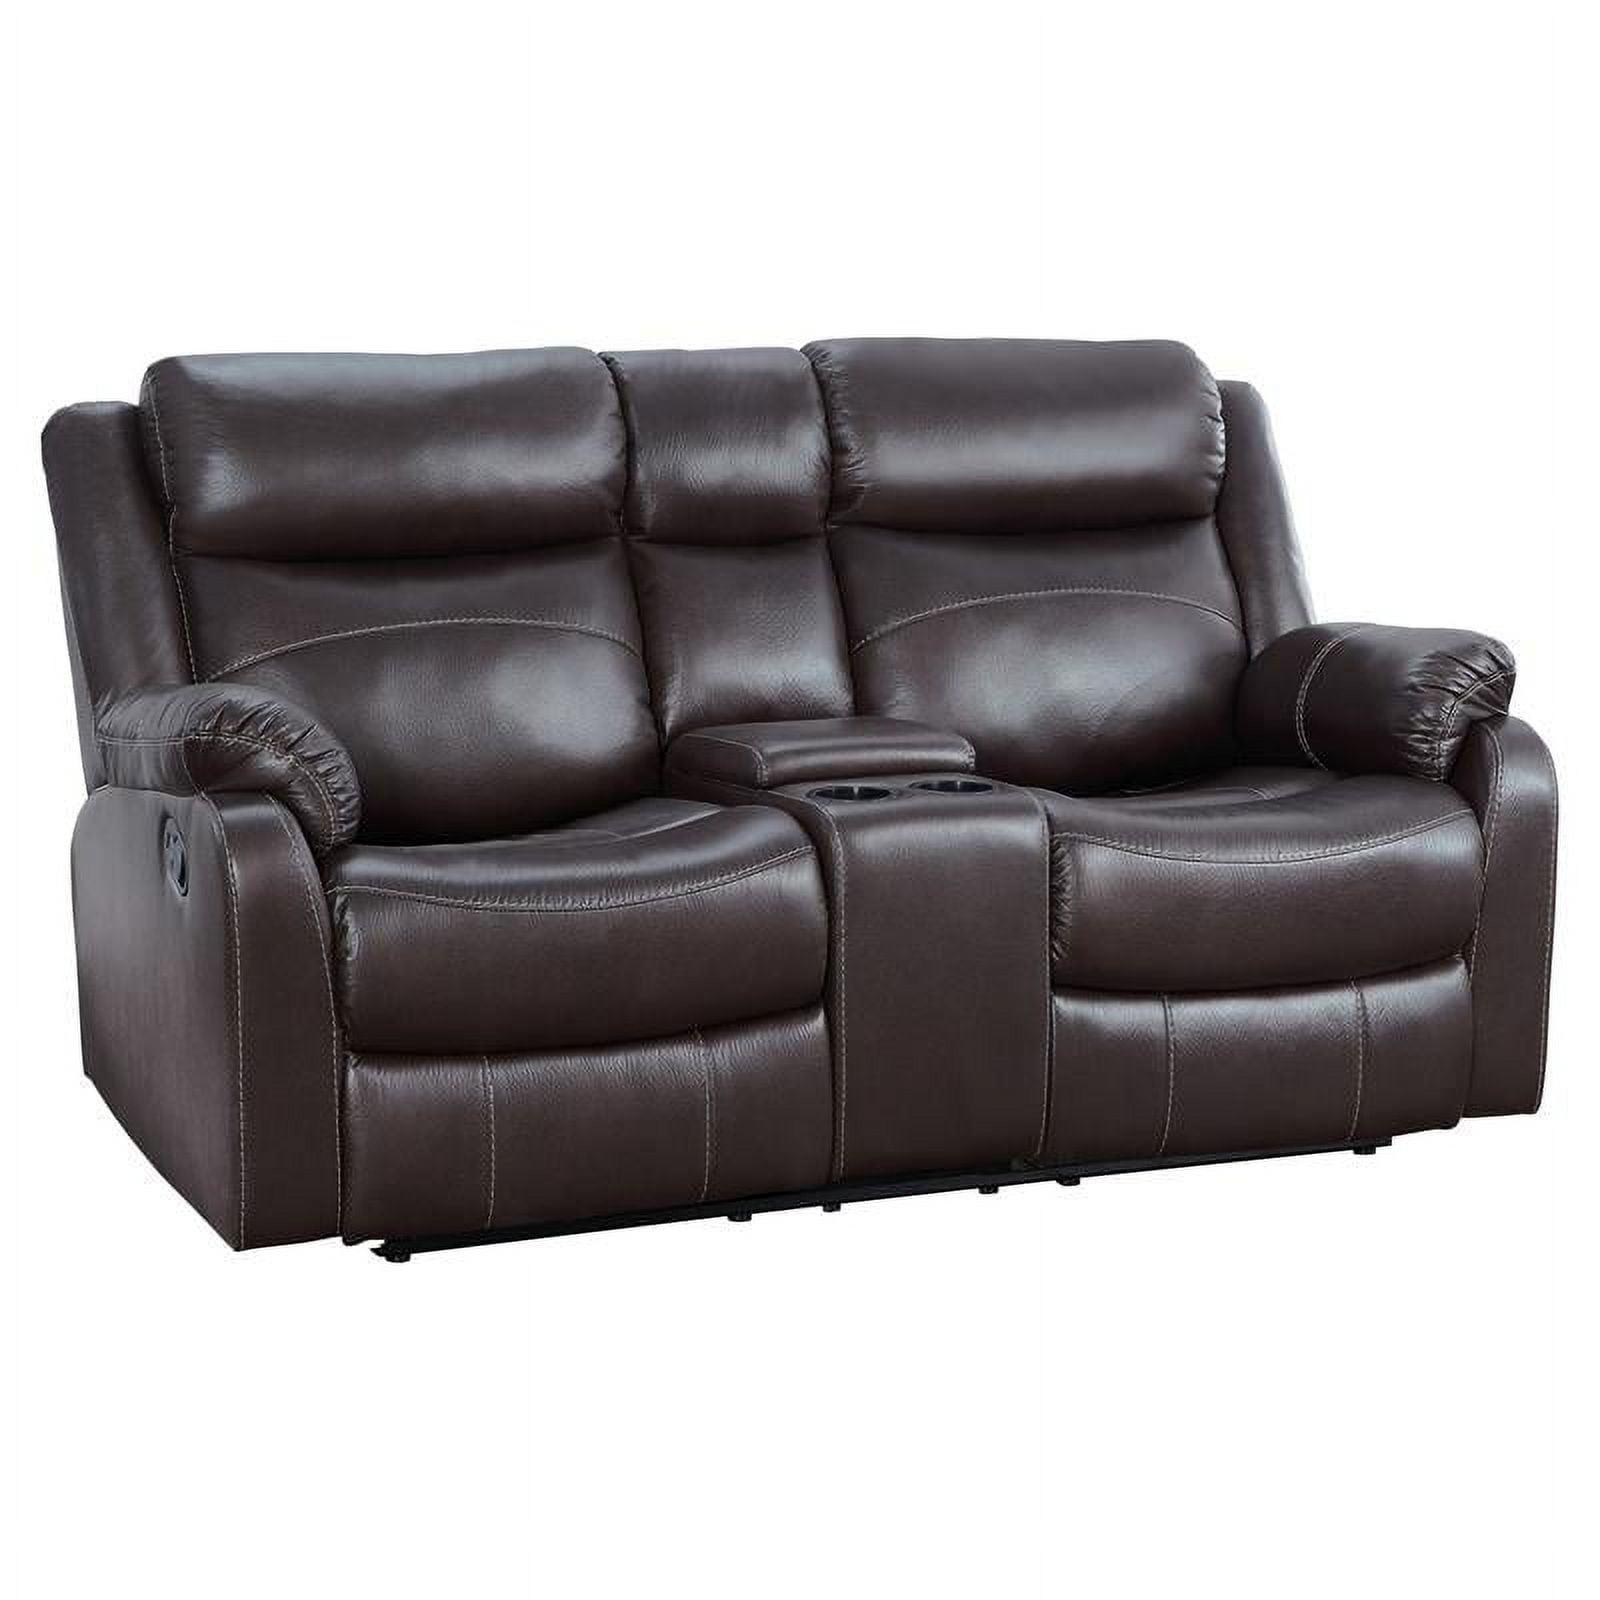 Contemporary Dark Brown Microfiber Reclining Loveseat with Cup Holder